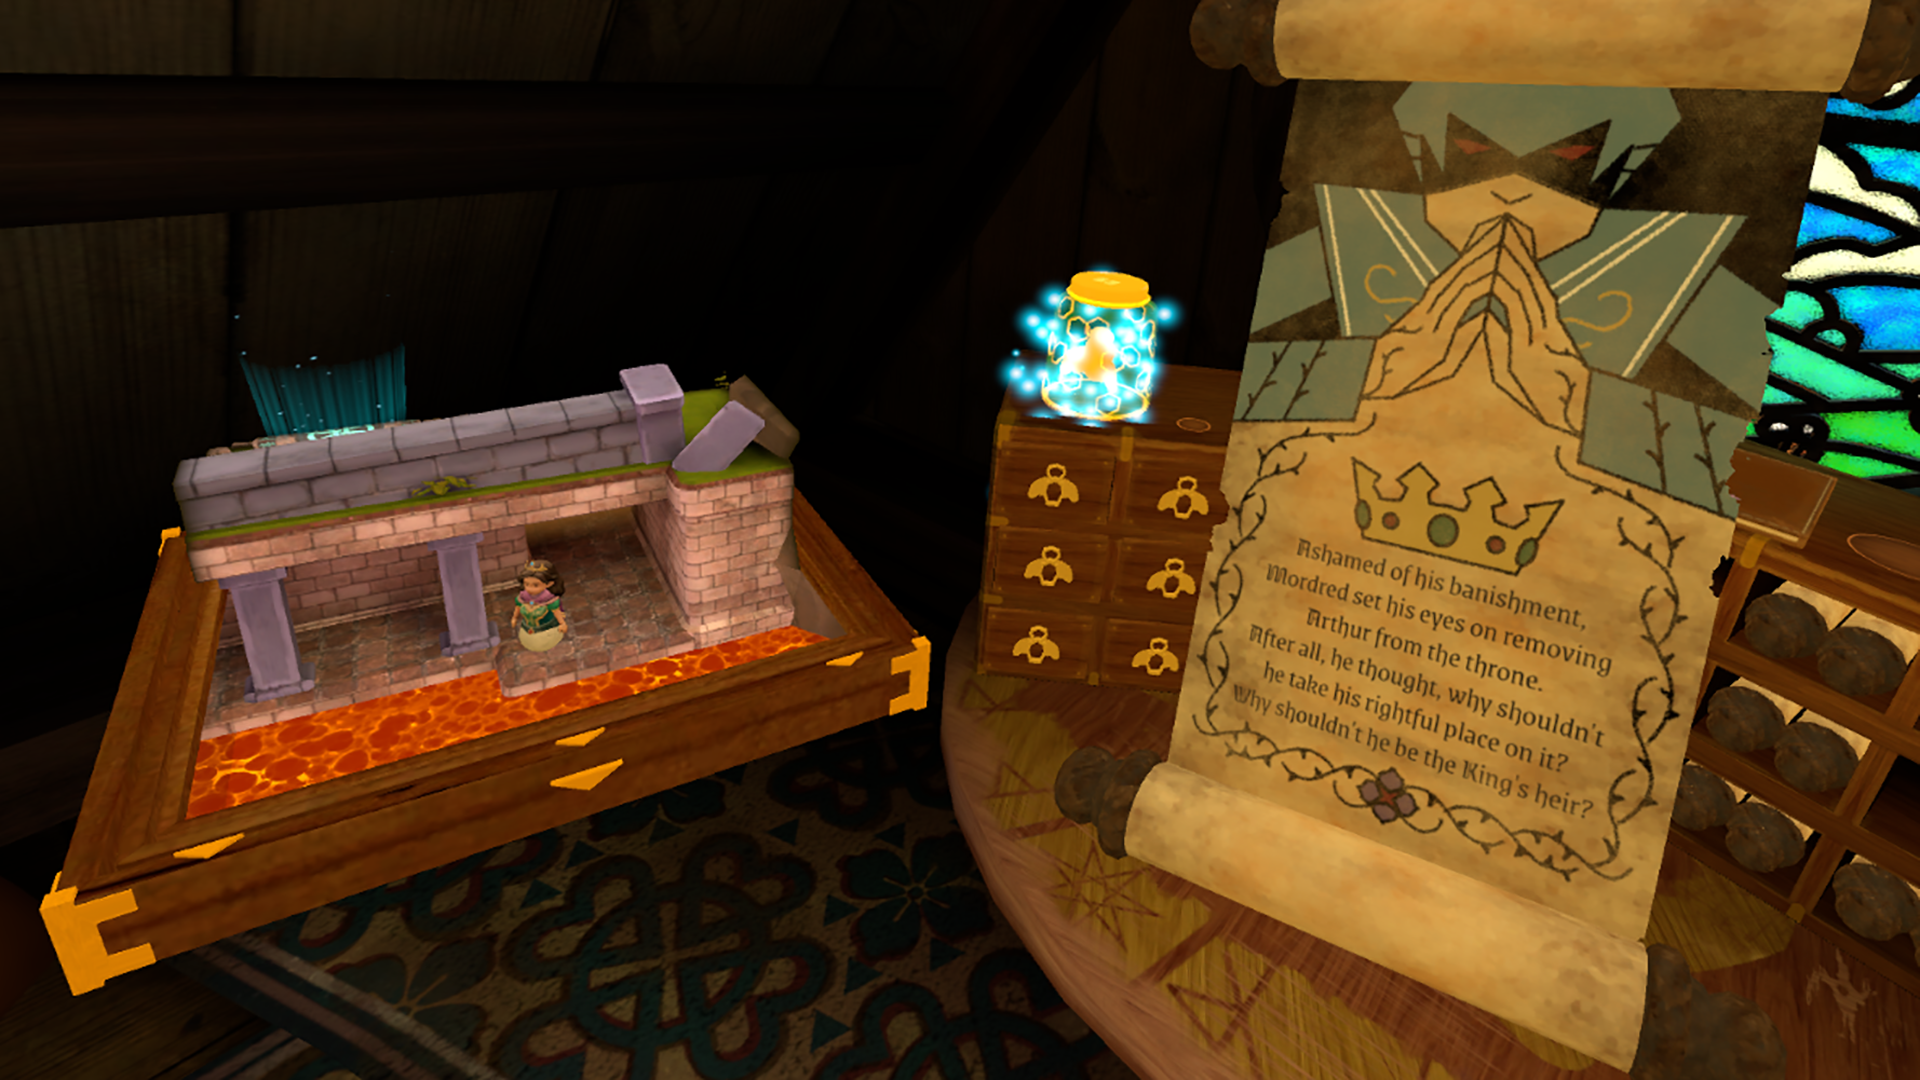 A screenshot showing Guinevere traversing a narrow platform next to lava, with a story scroll depicting Mordred next to the game board.